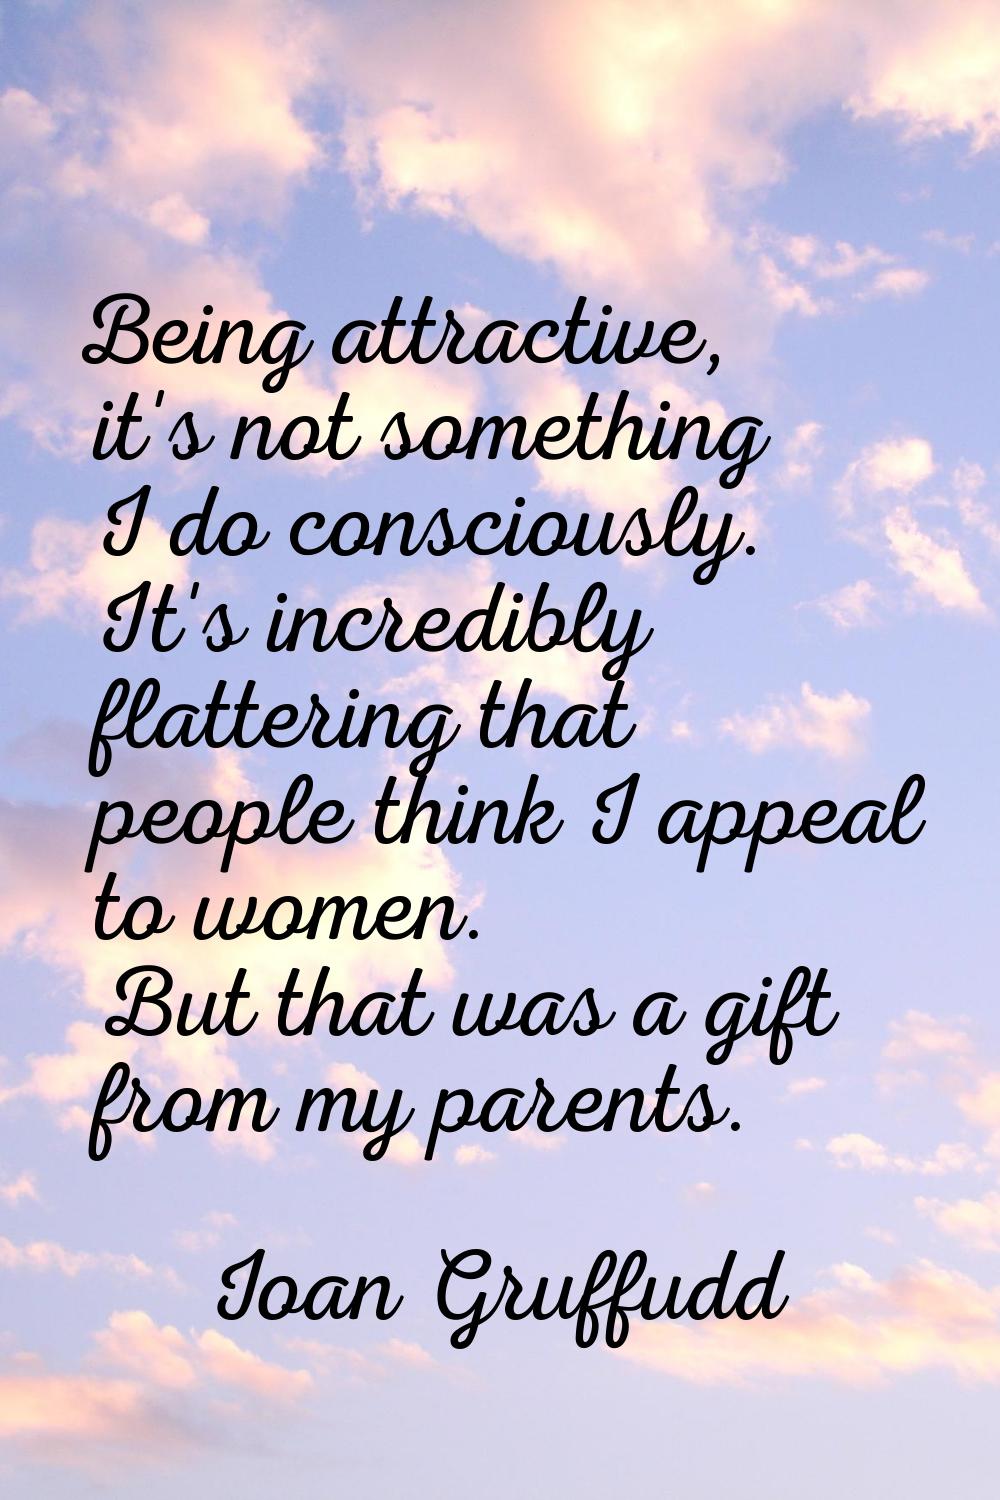 Being attractive, it's not something I do consciously. It's incredibly flattering that people think